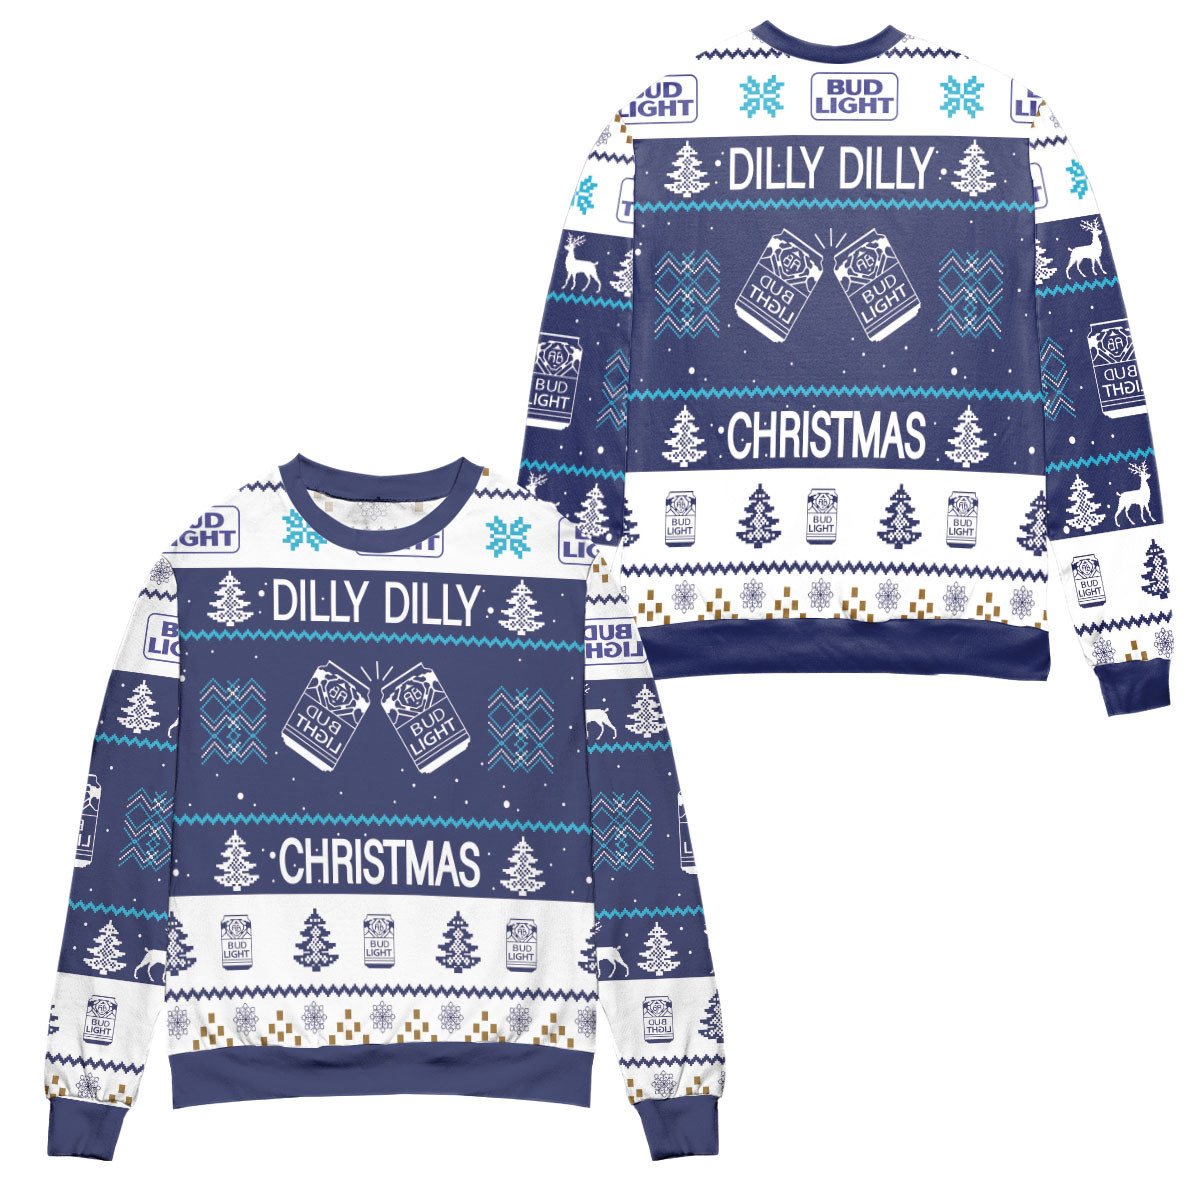 Bud Light Dilly Dilly Christmas Ugly Christmas Sweater – All Over Print 3D Sweater